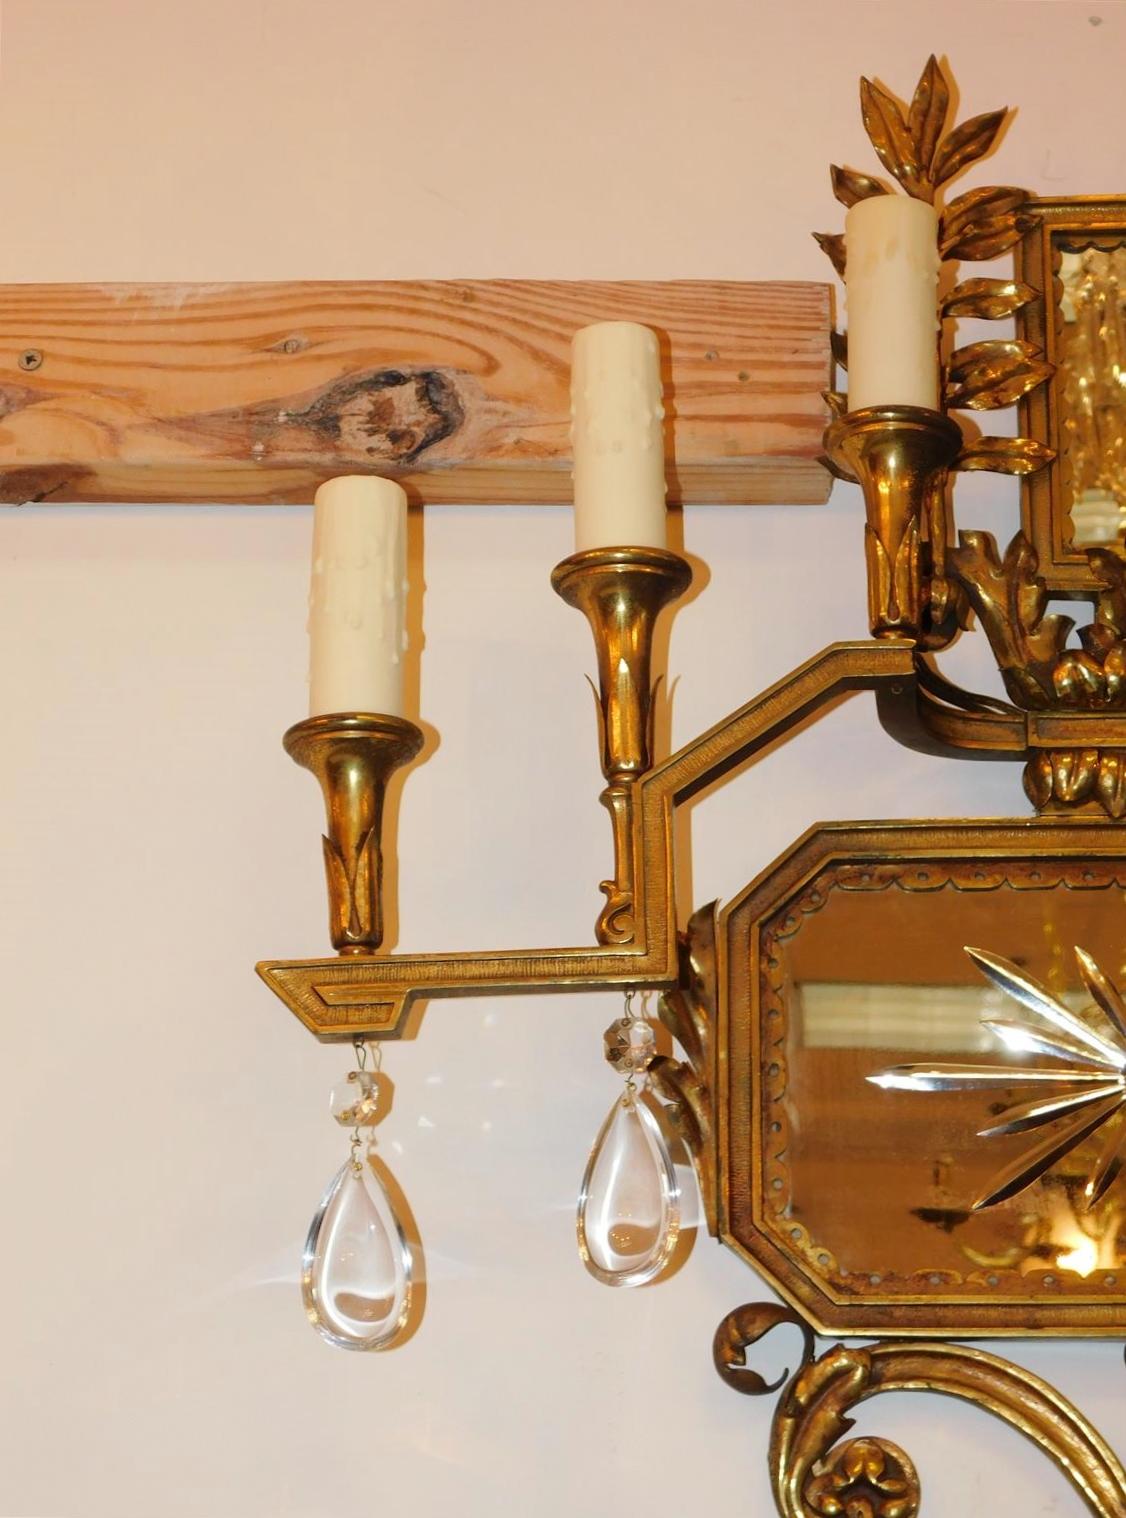 Late 19th Century Pair of American Gilt Bronze & Star Mirrored Wall Sconces, Caldwell & Co. C 1870 For Sale